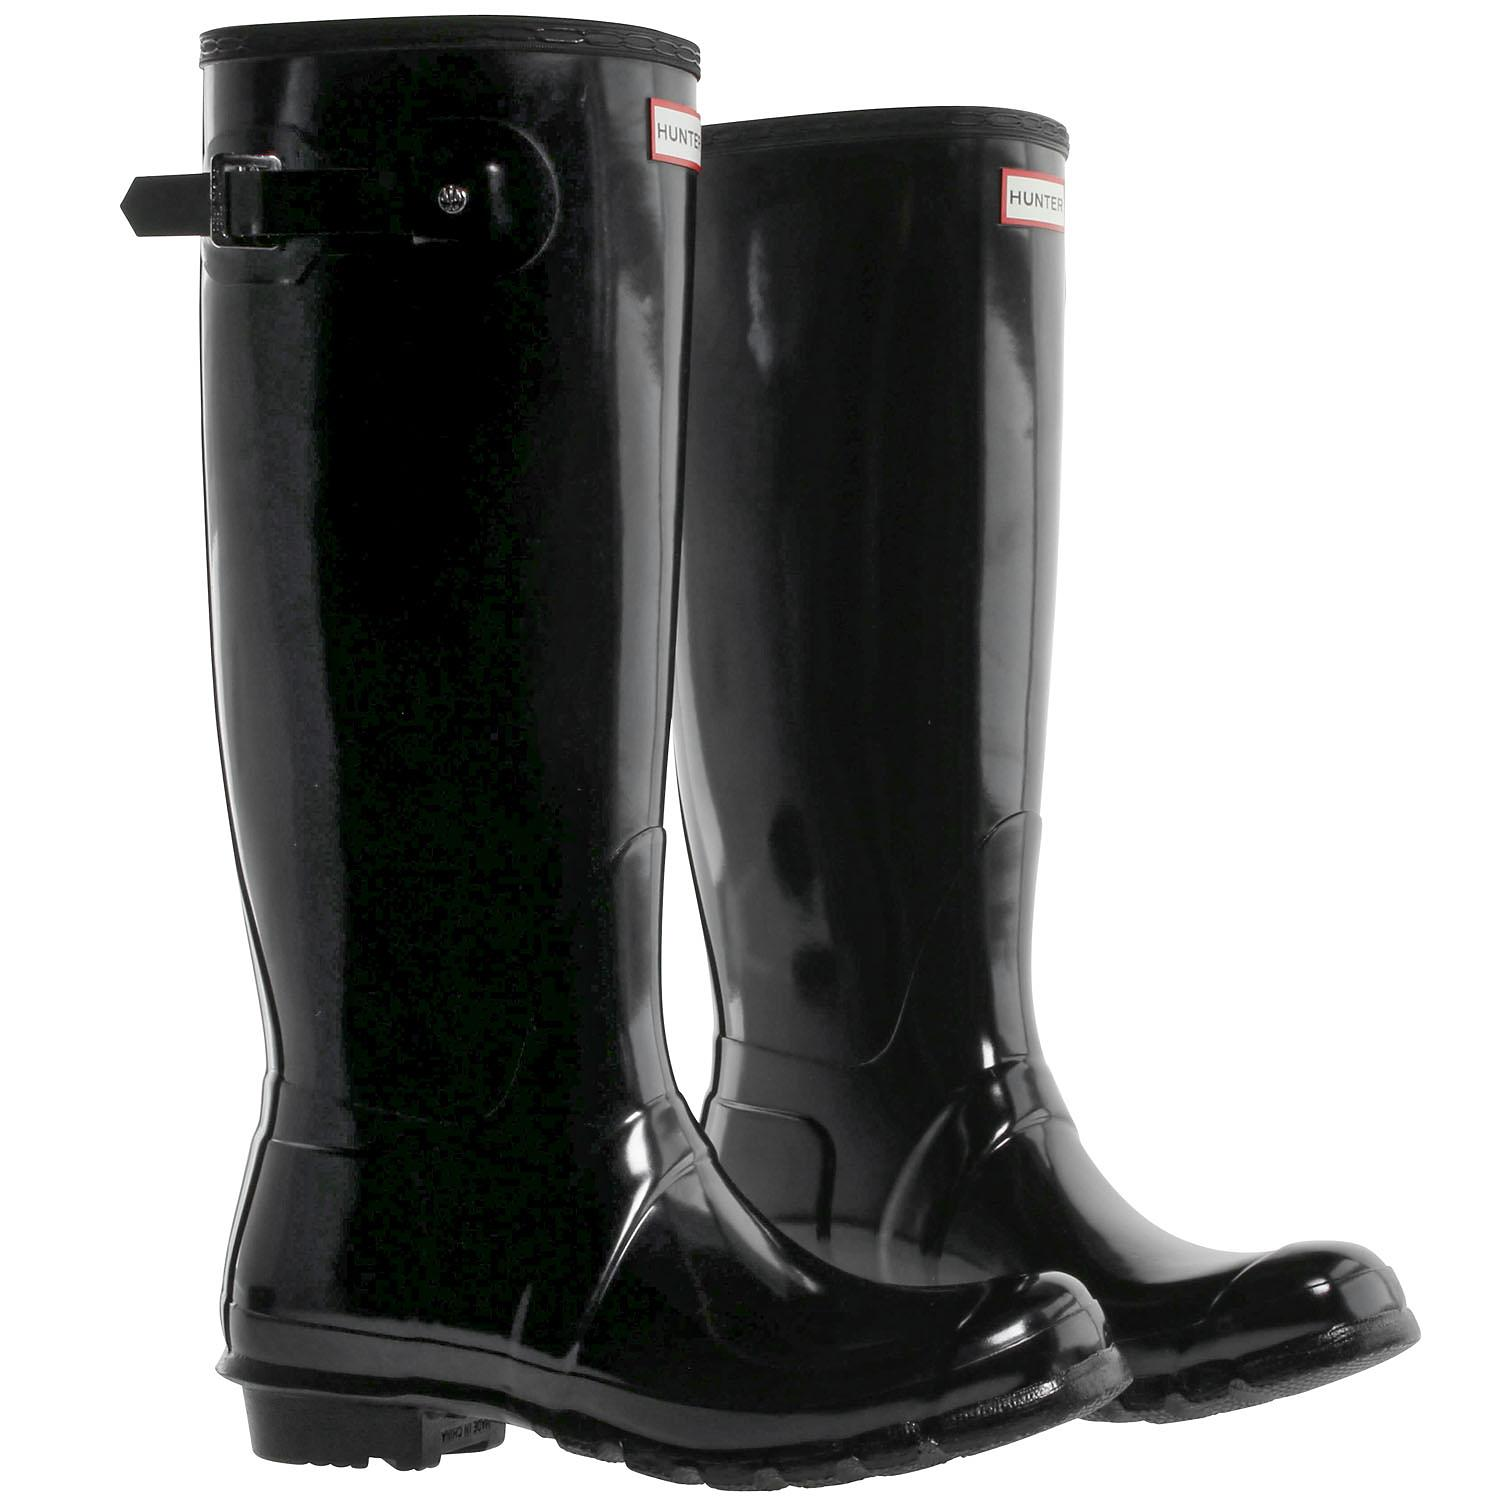 Womens Tall Hunter Rain Boots (Various Styles) Only $78.98 Shipped at ...